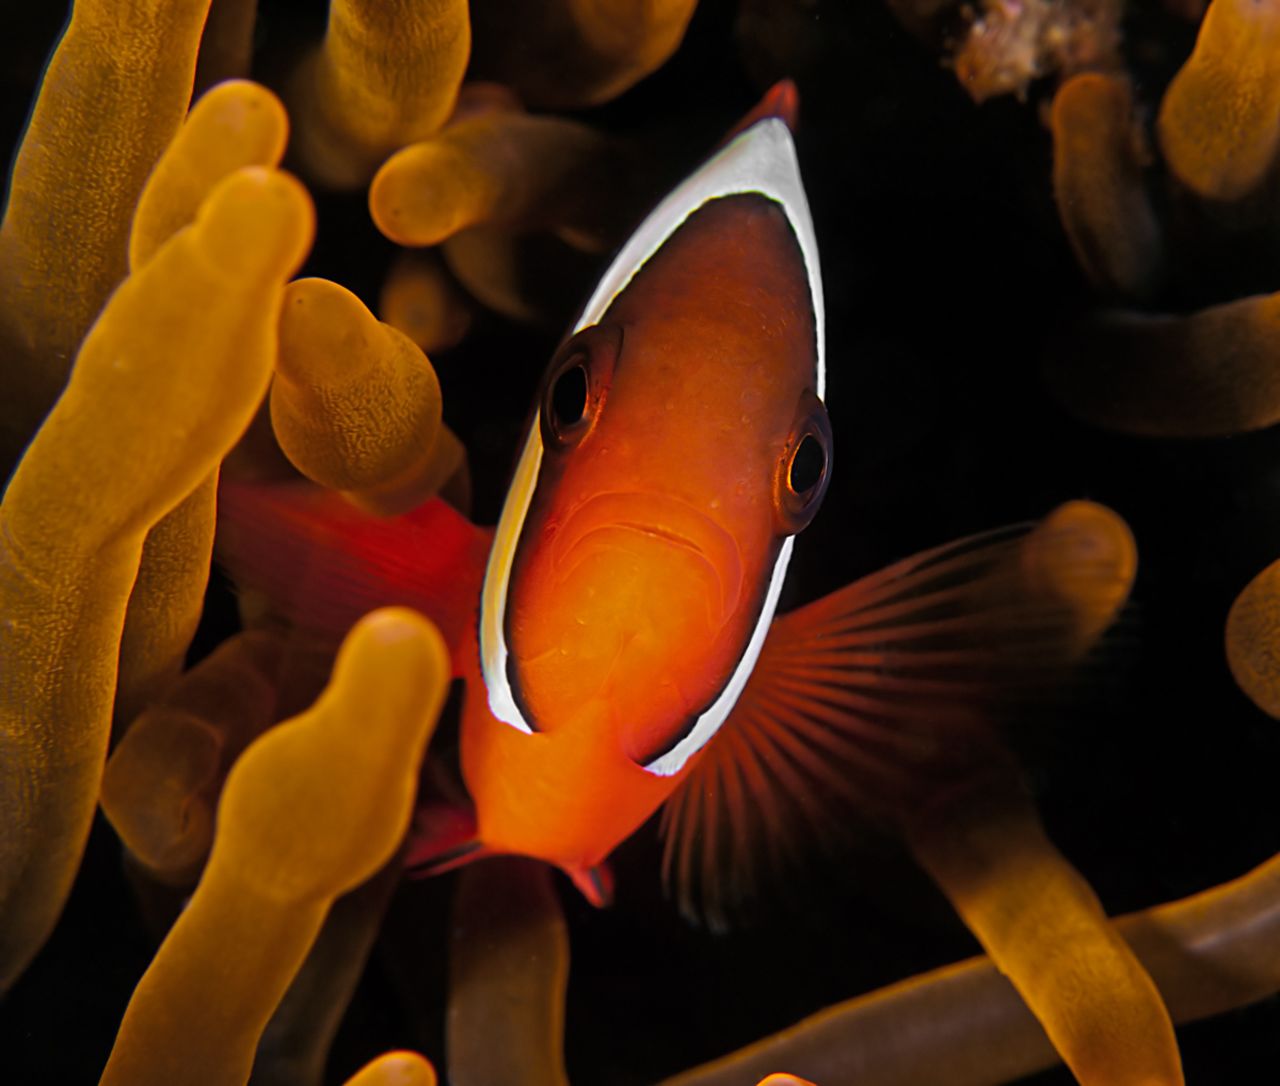 <a href="http://ireport.cnn.com/docs/DOC-1140659">Meiri</a> said, "Look for the small details when you dive. There are a lot of hidden creatures in the oceans." He captured this tomato clown fish in 2011 during a dive in Dauin, Philippines.